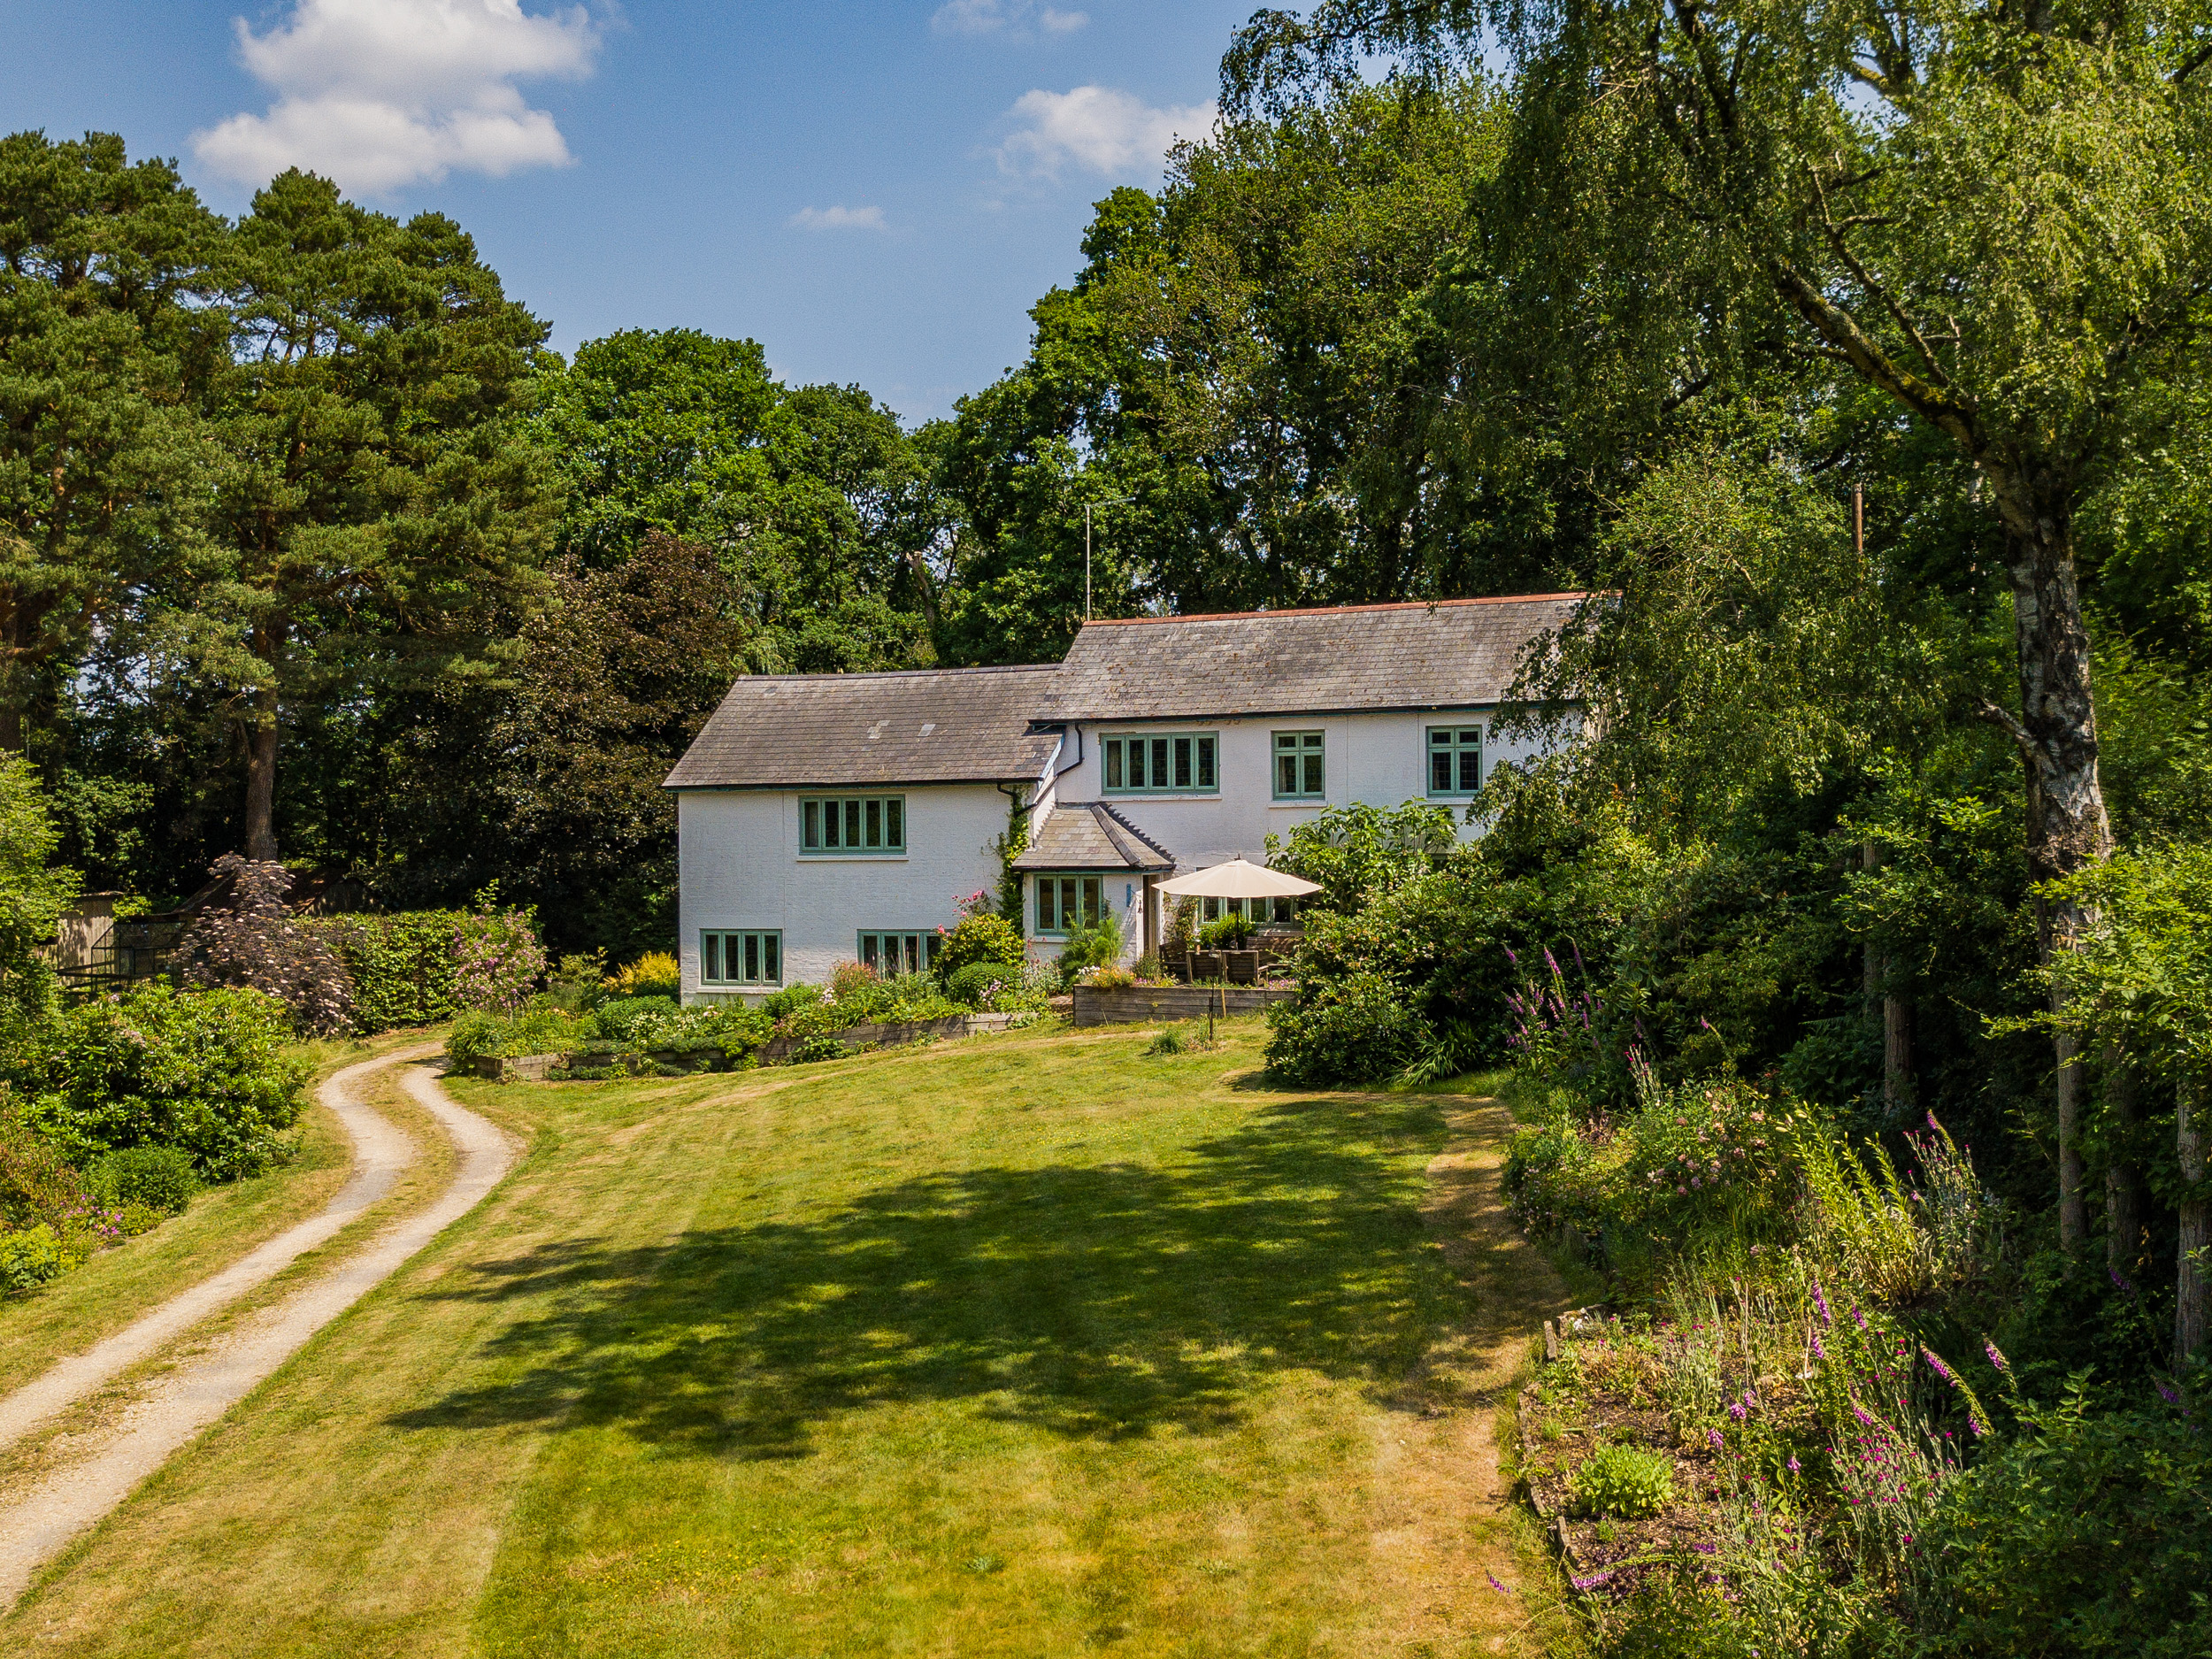 4 bedroom Cottage for rent in New Forest